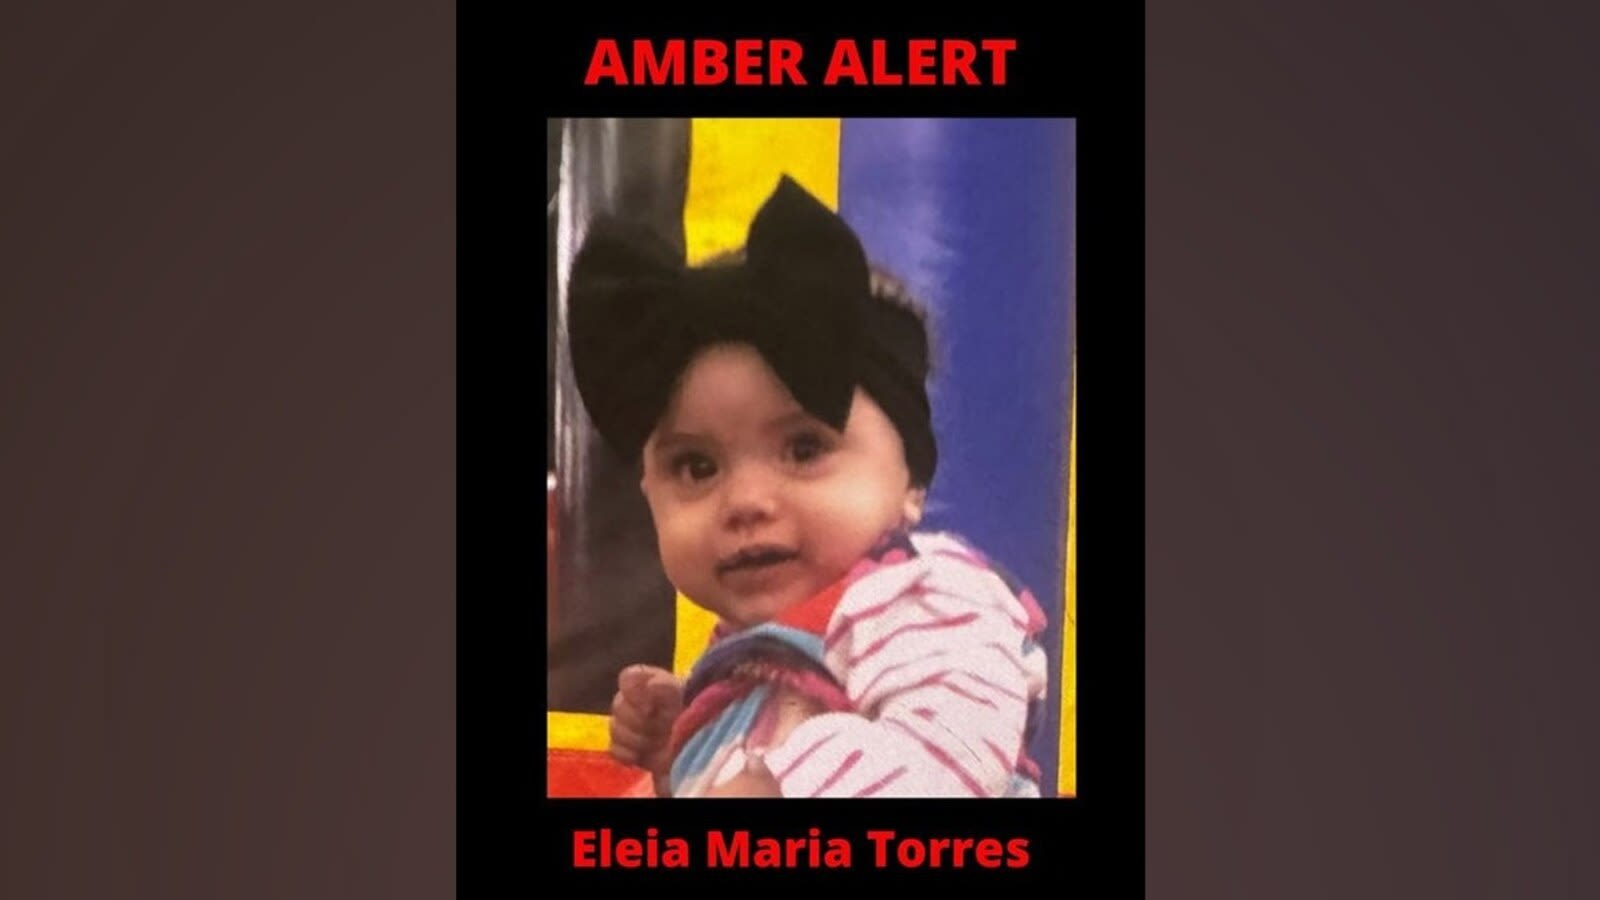 Abducted 10-month-old girl has been found, officials say